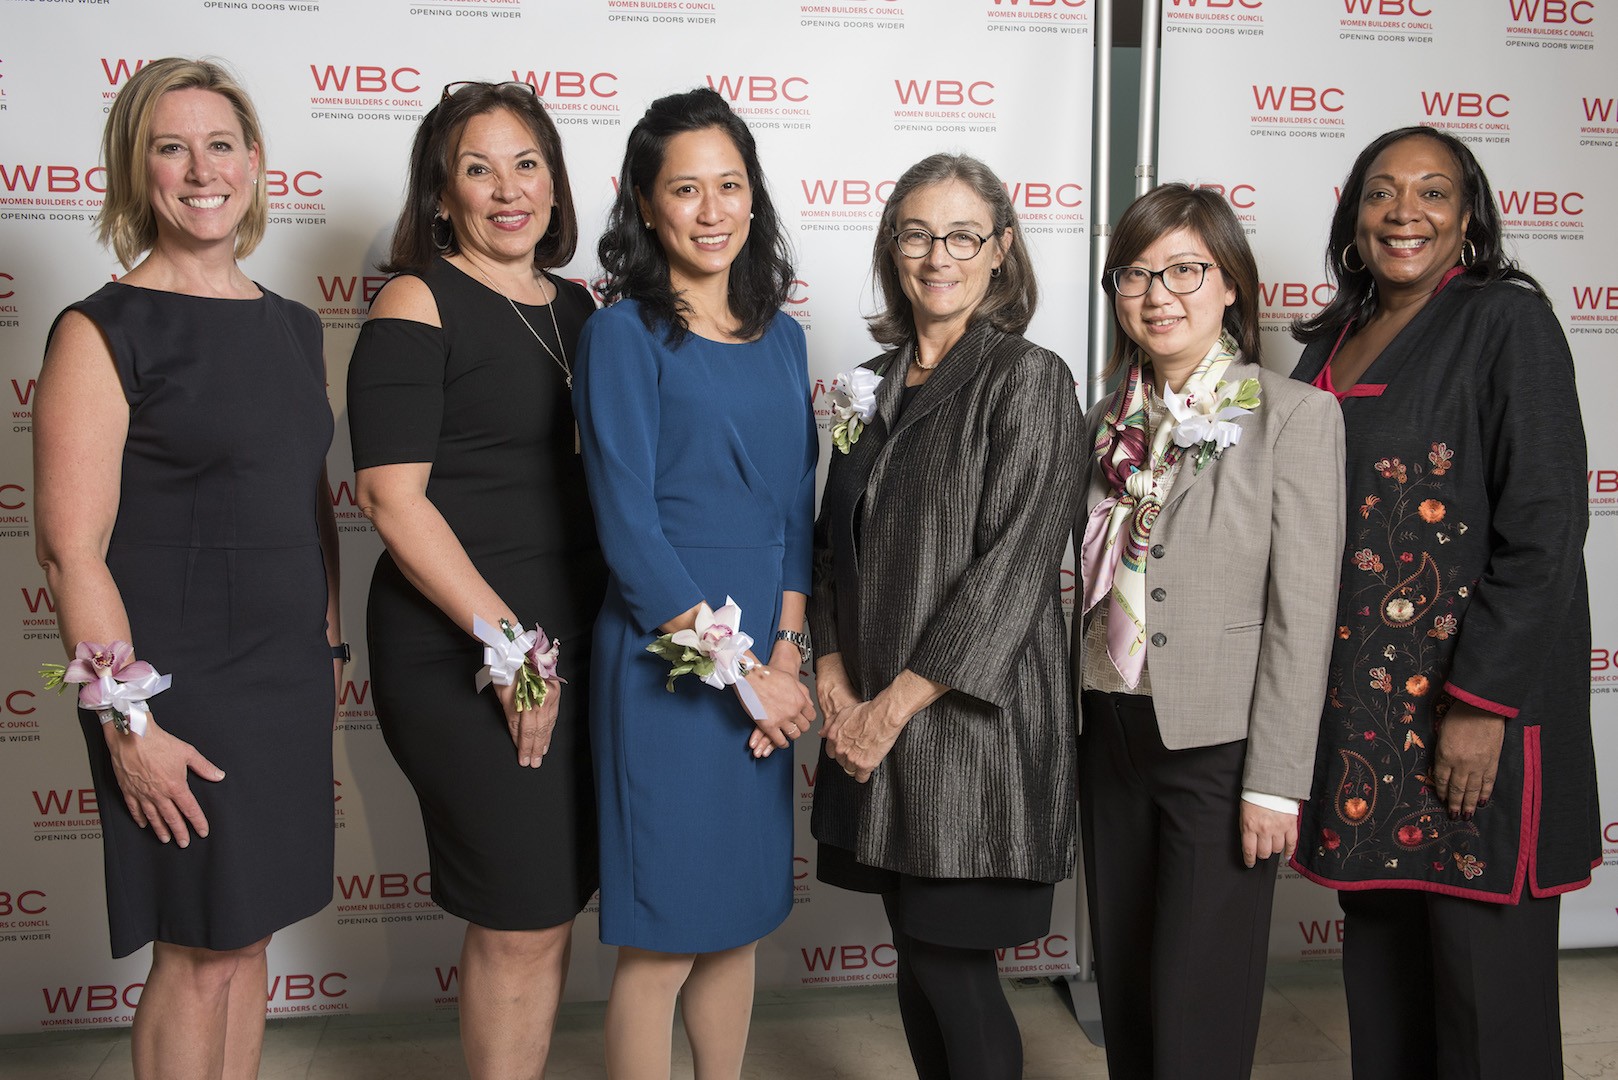 "Outstanding Women in Construction" from Columbia University Facilities and Operations and Columbia University Medical Center Facilities Management, as honored by the Women Builders Council (l to r): Karri Rivera, Diana Mejia, Geraldine Tan, Janet Grapengeter, Kim Chen, and Tanya Pope.